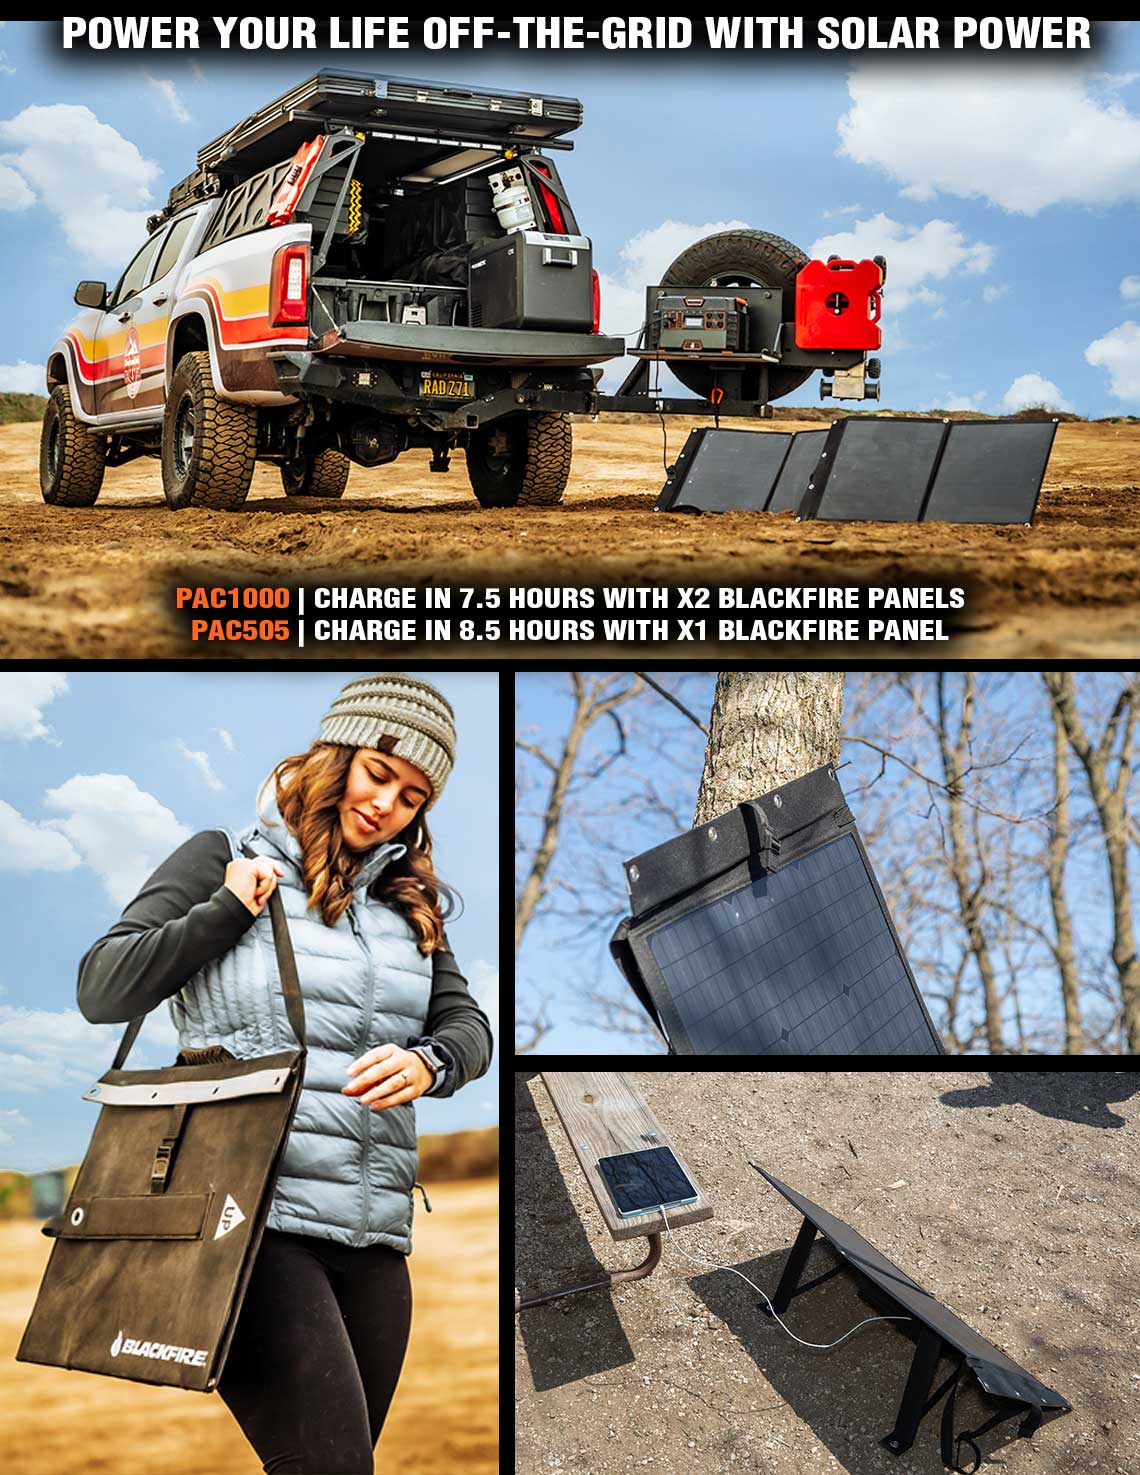 Extra features of the Blackfire Portable Solar Panel 60W